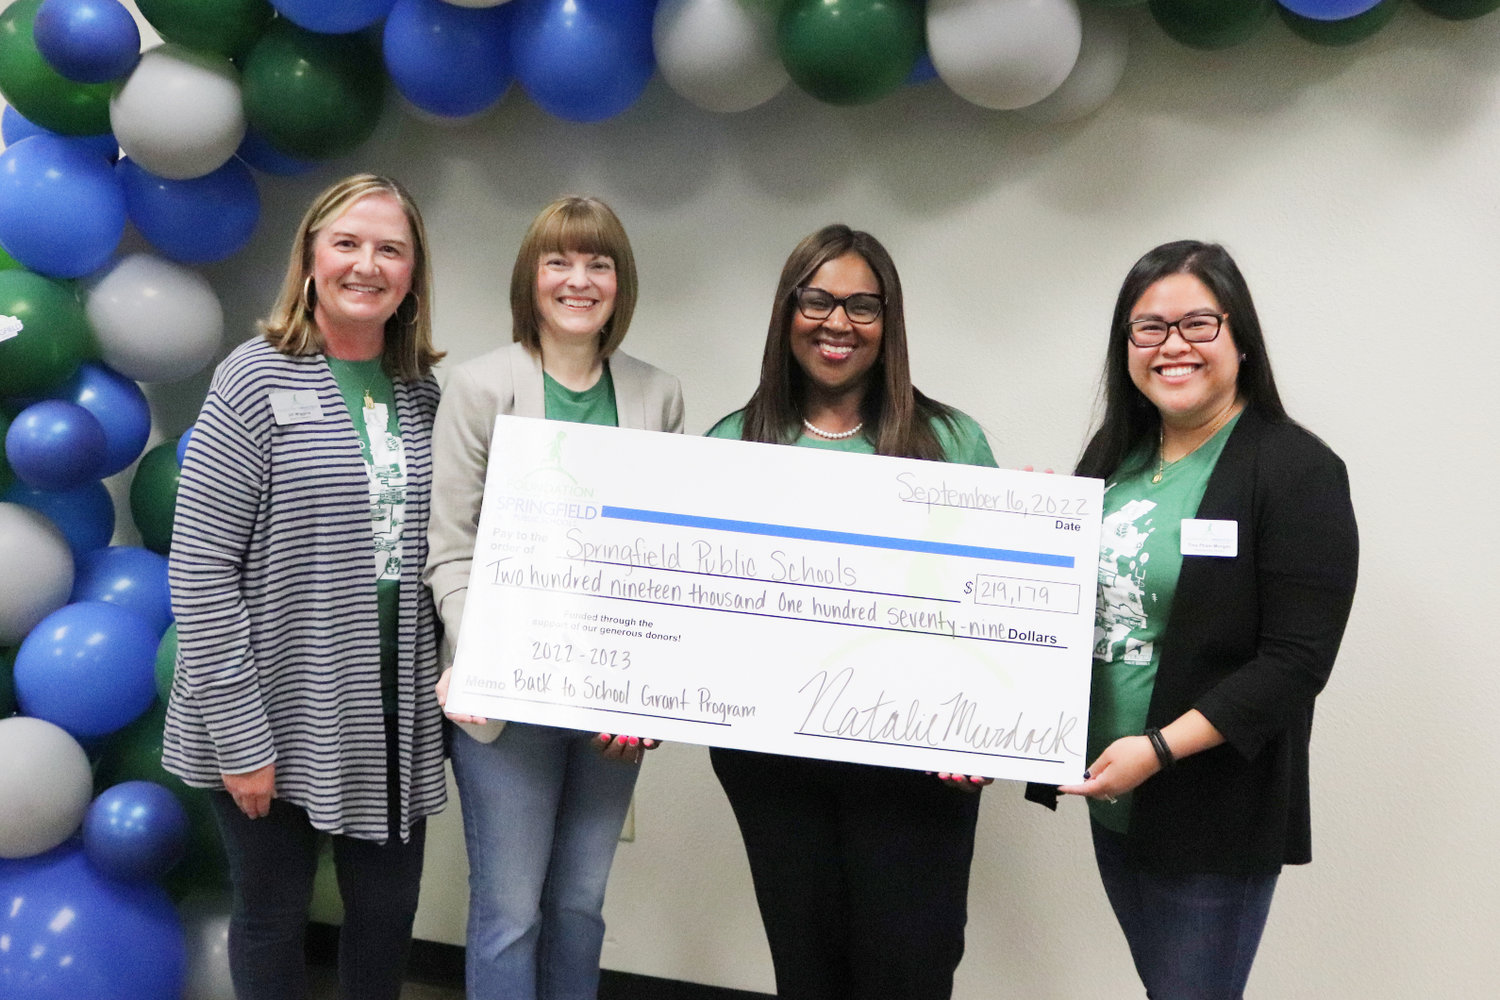 SPS Superintendent Grenita Lathan, second from right, accepts grants on behalf of the district from Foundation for SPS officials Jill Wiggins, Natalie Murdock and Tina Pham-Morgan.